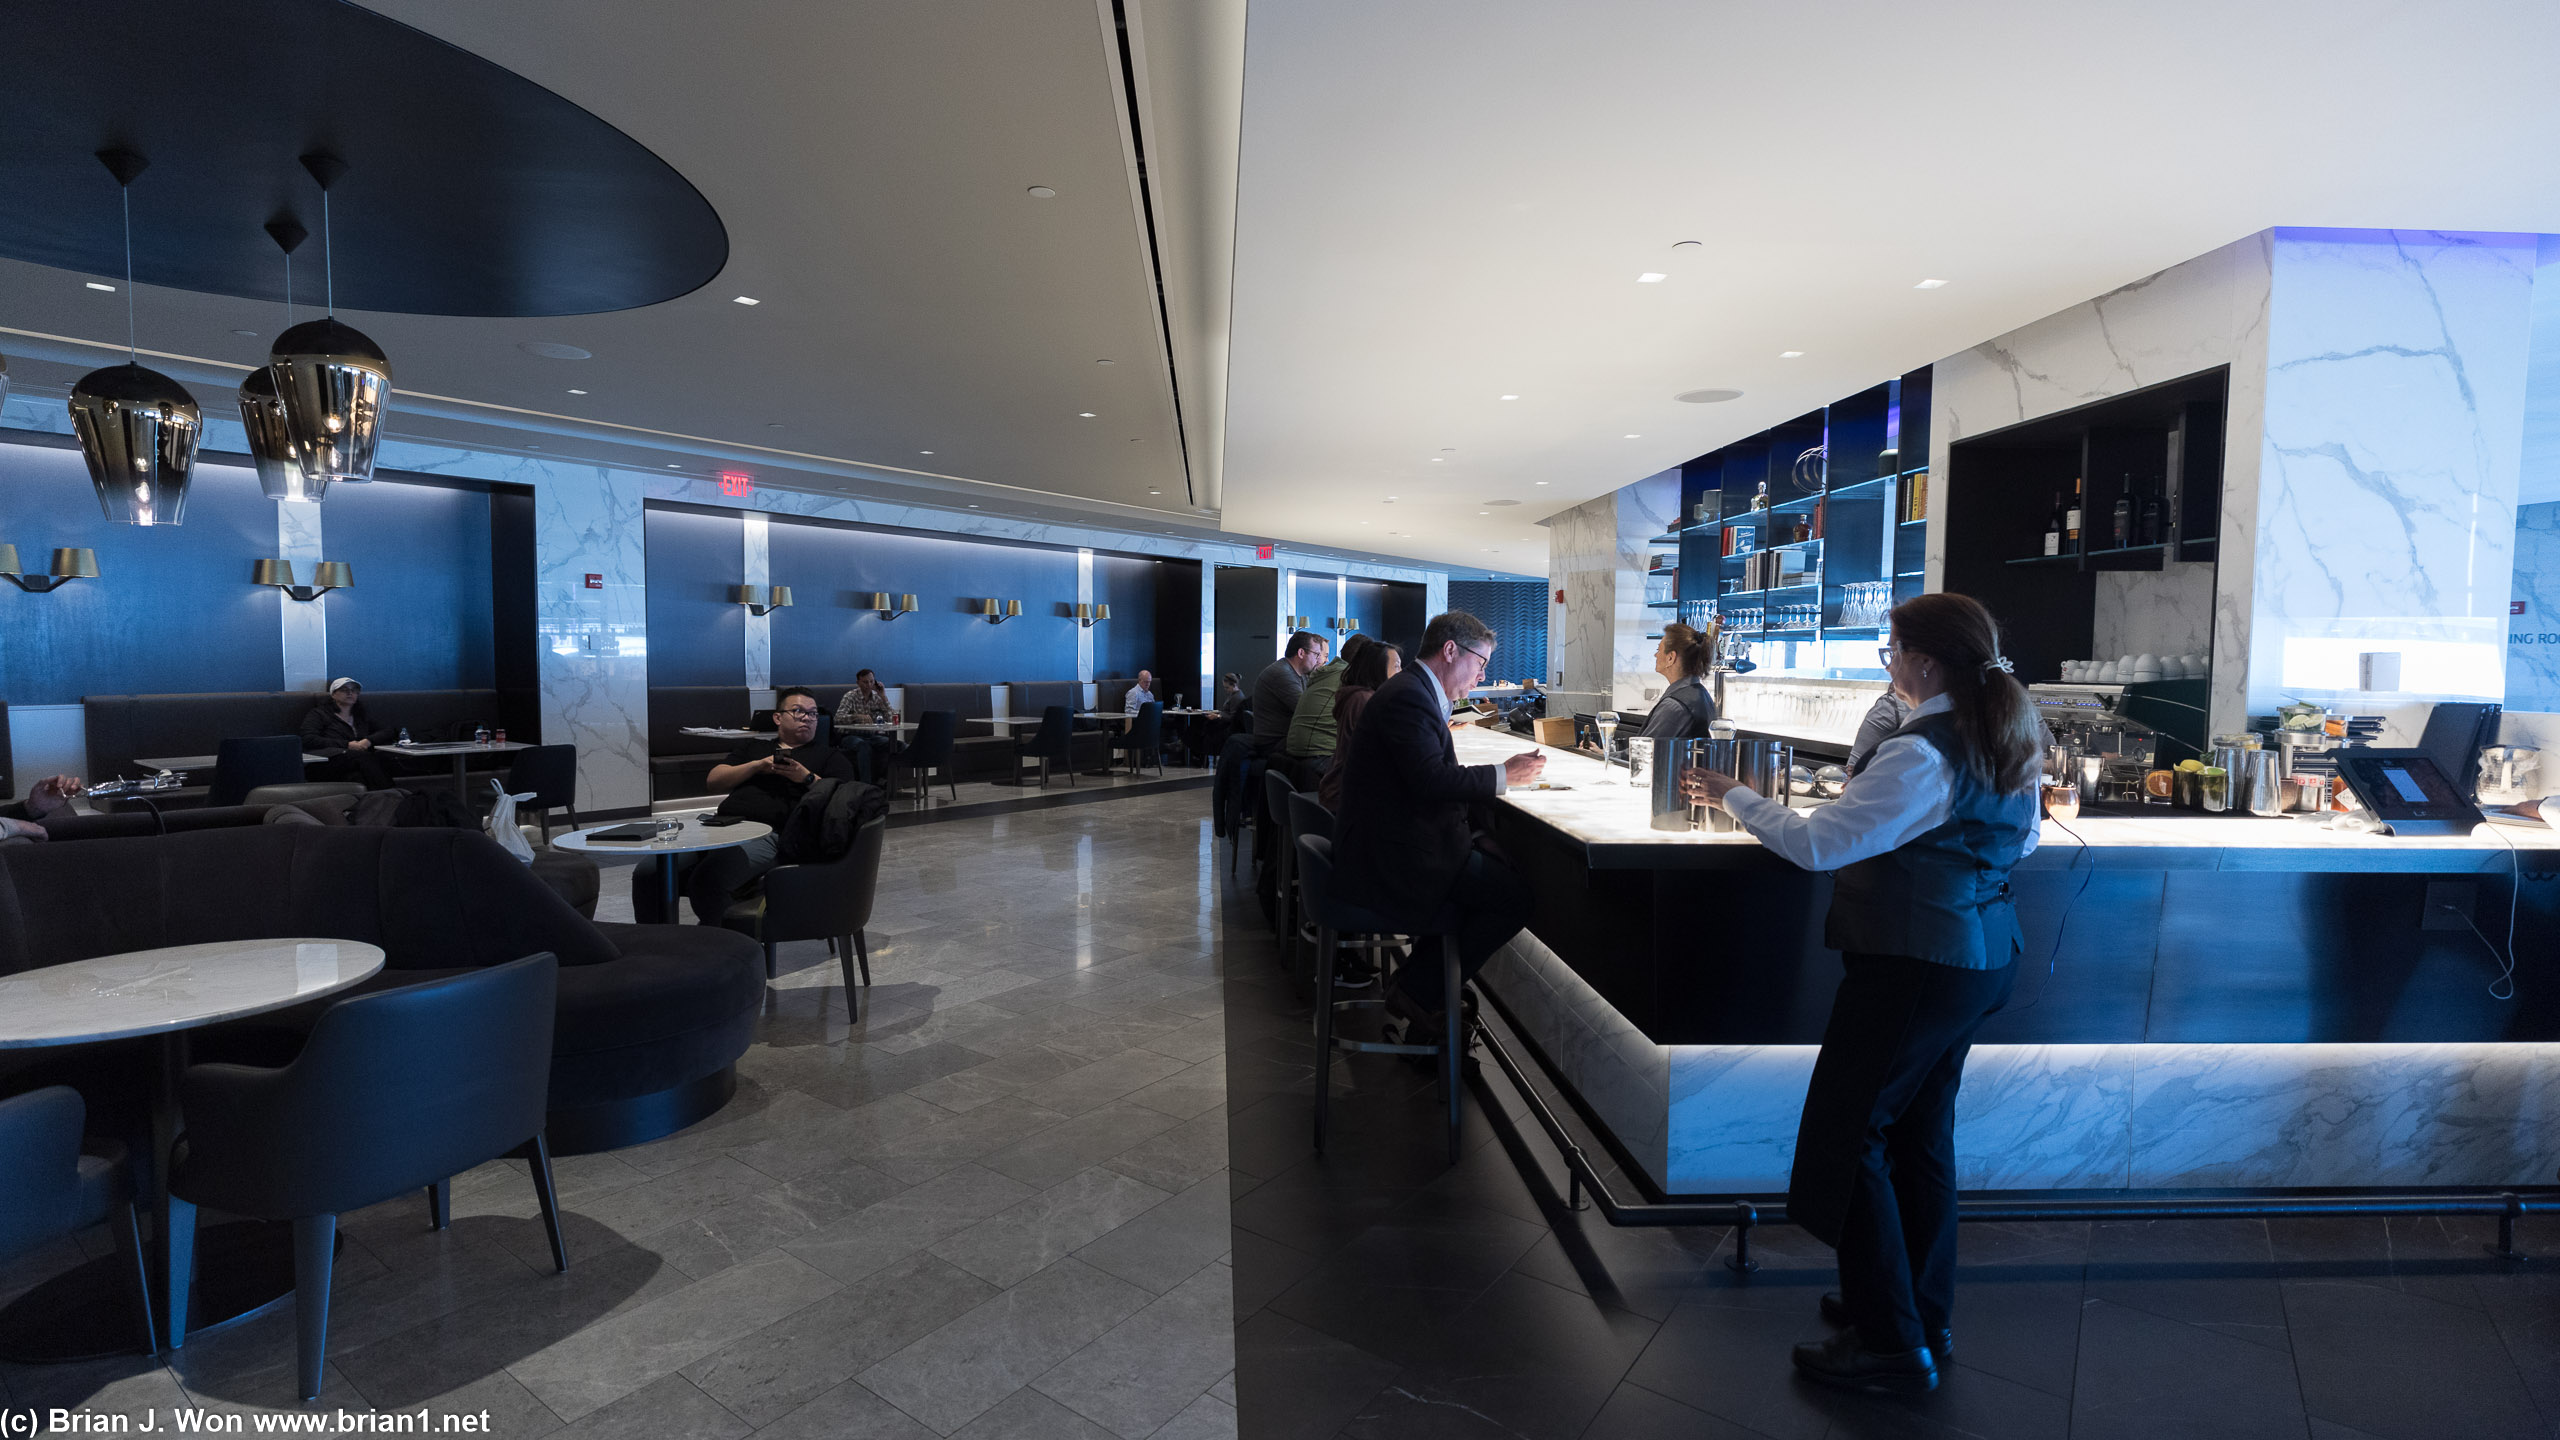 As stylish and dramatic as the space for the bar is... the LHR bar is still better.